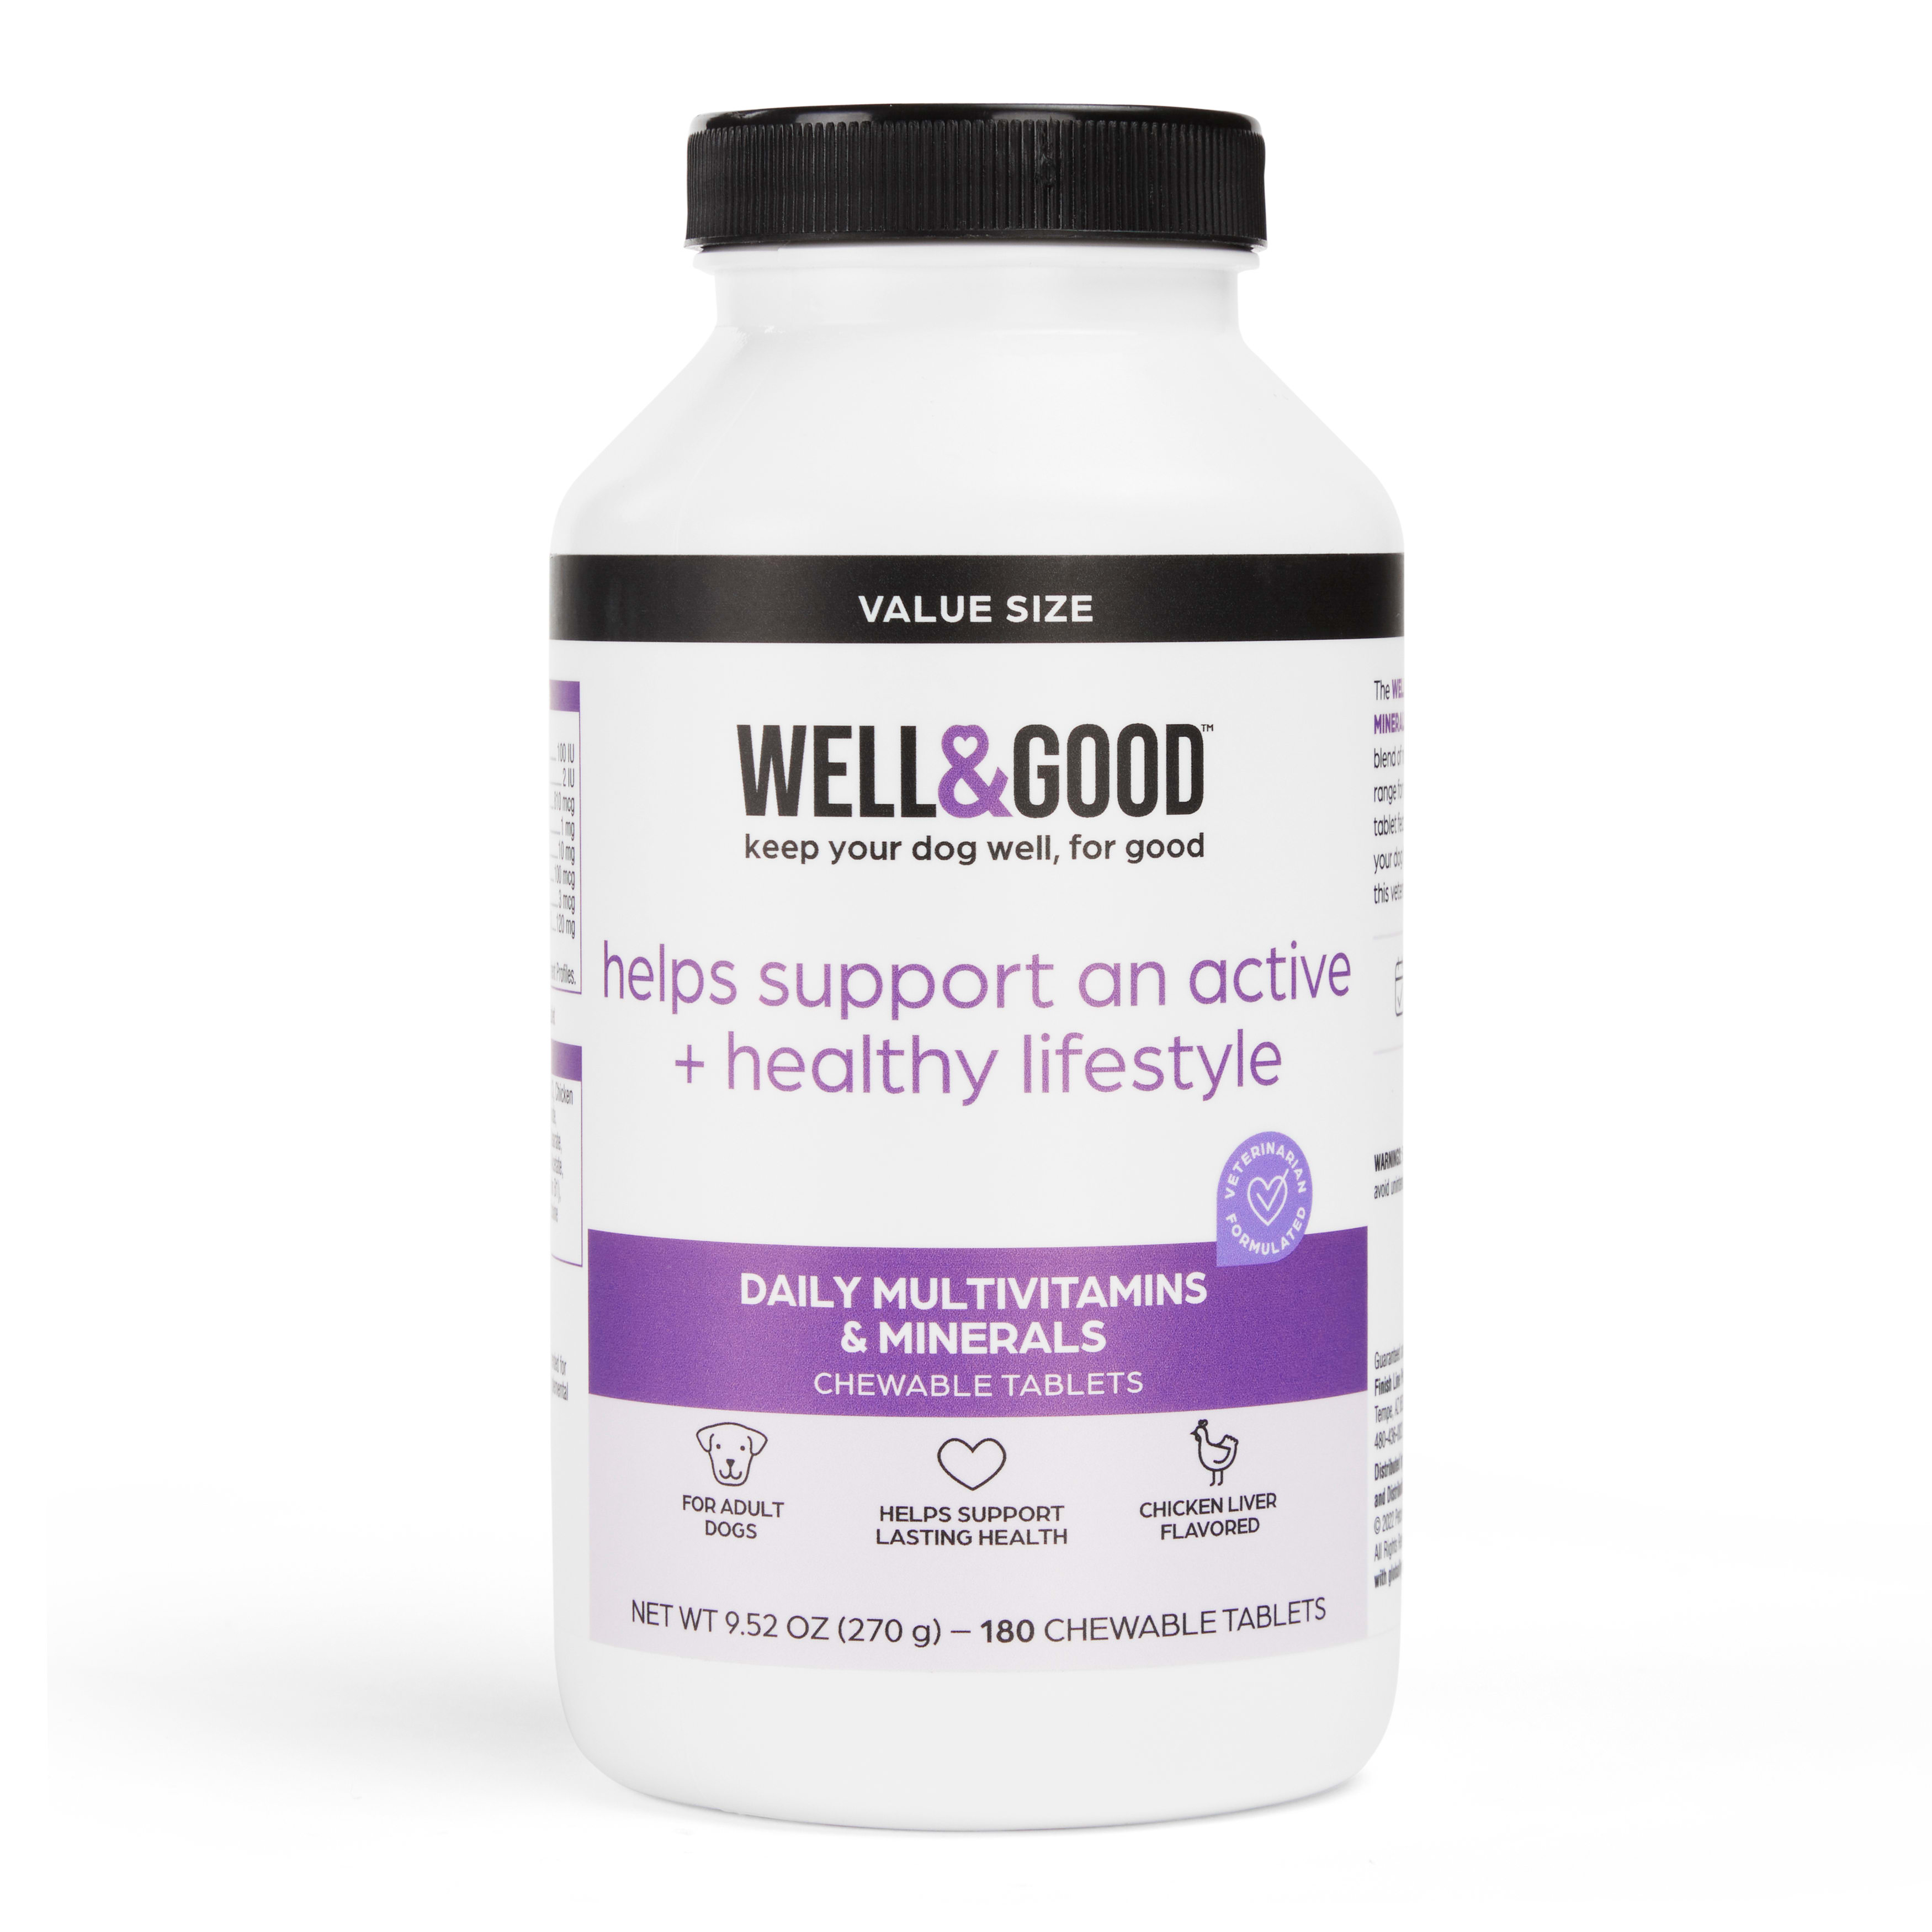 Well & Good Dog Multivitamins Chewable Tablets, Count of 180, 180 CT